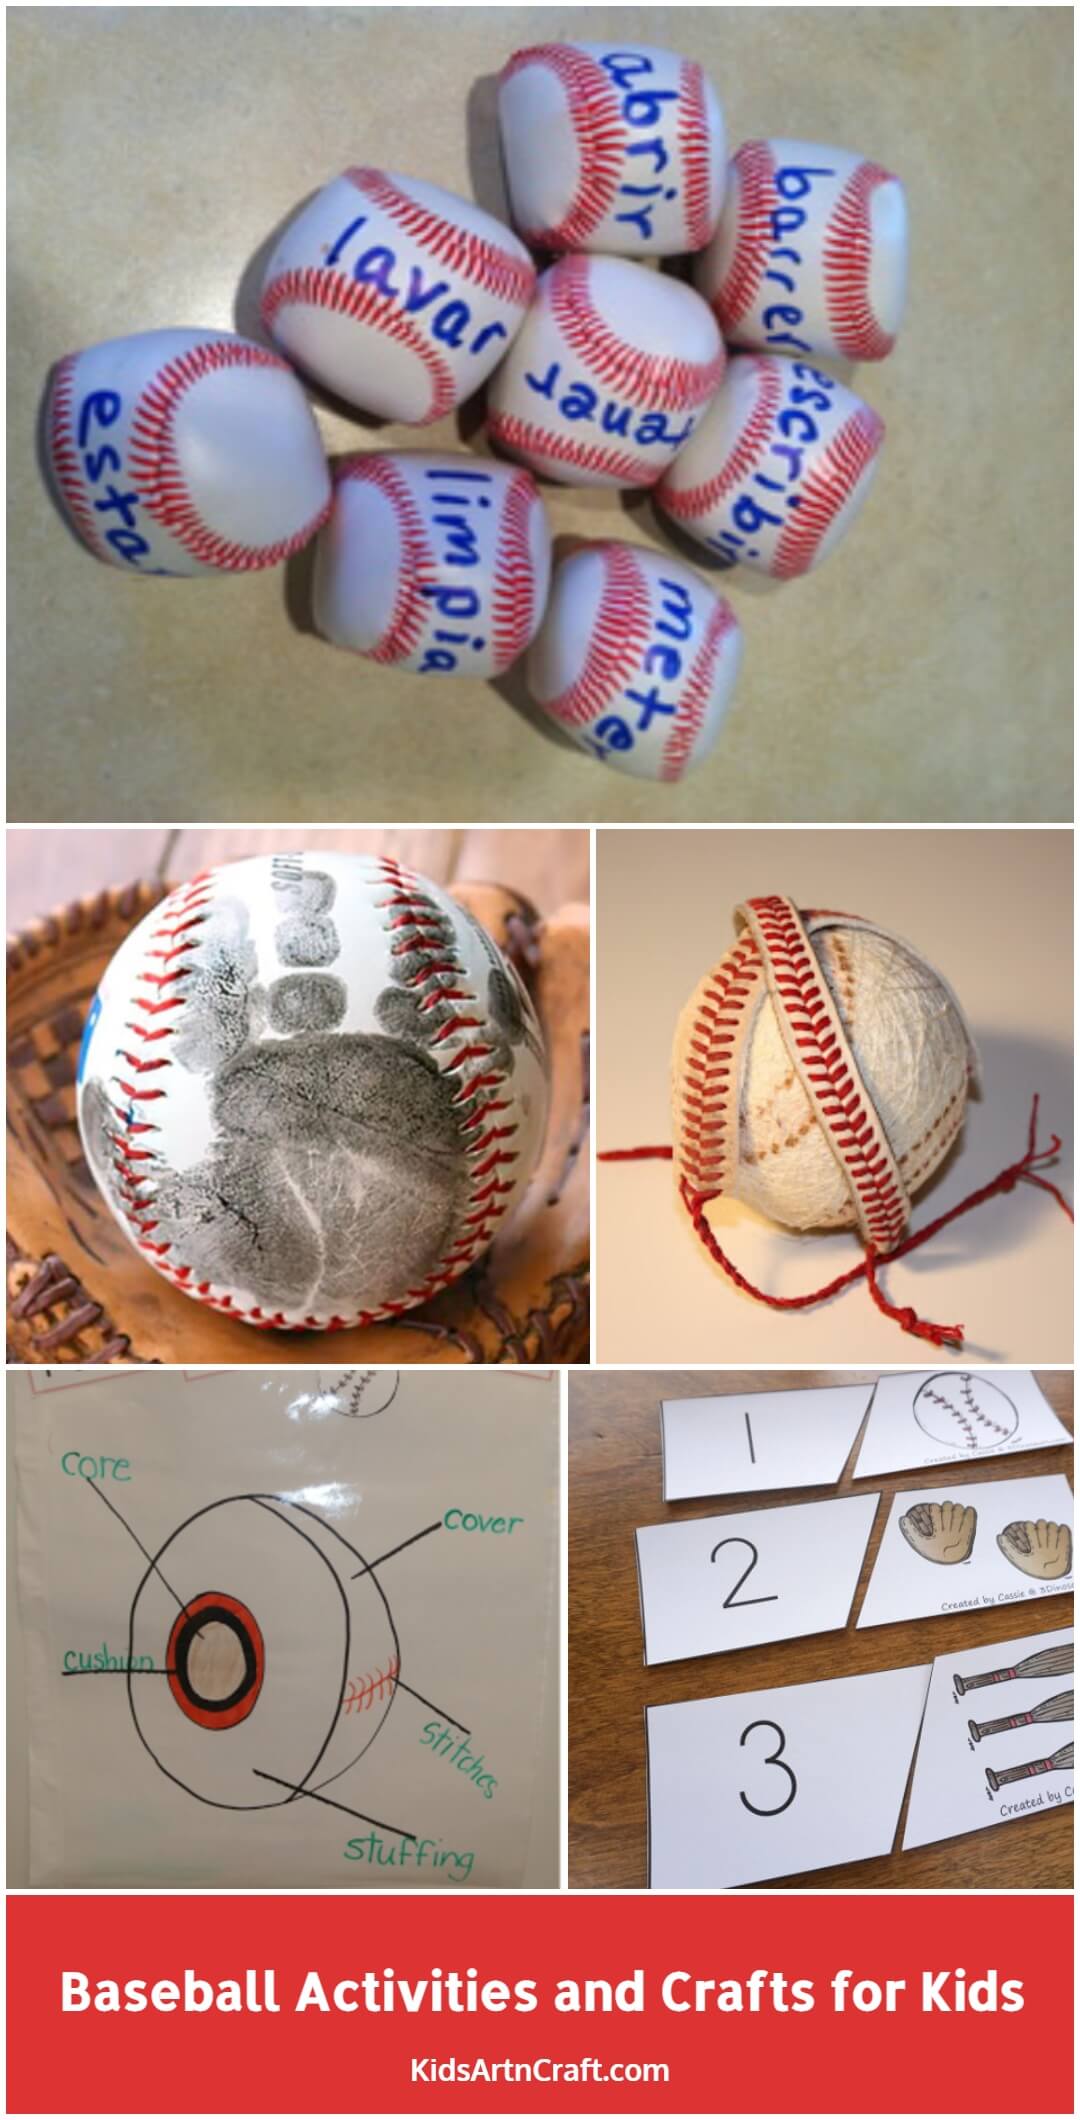 Baseball Activities and Crafts for Kids